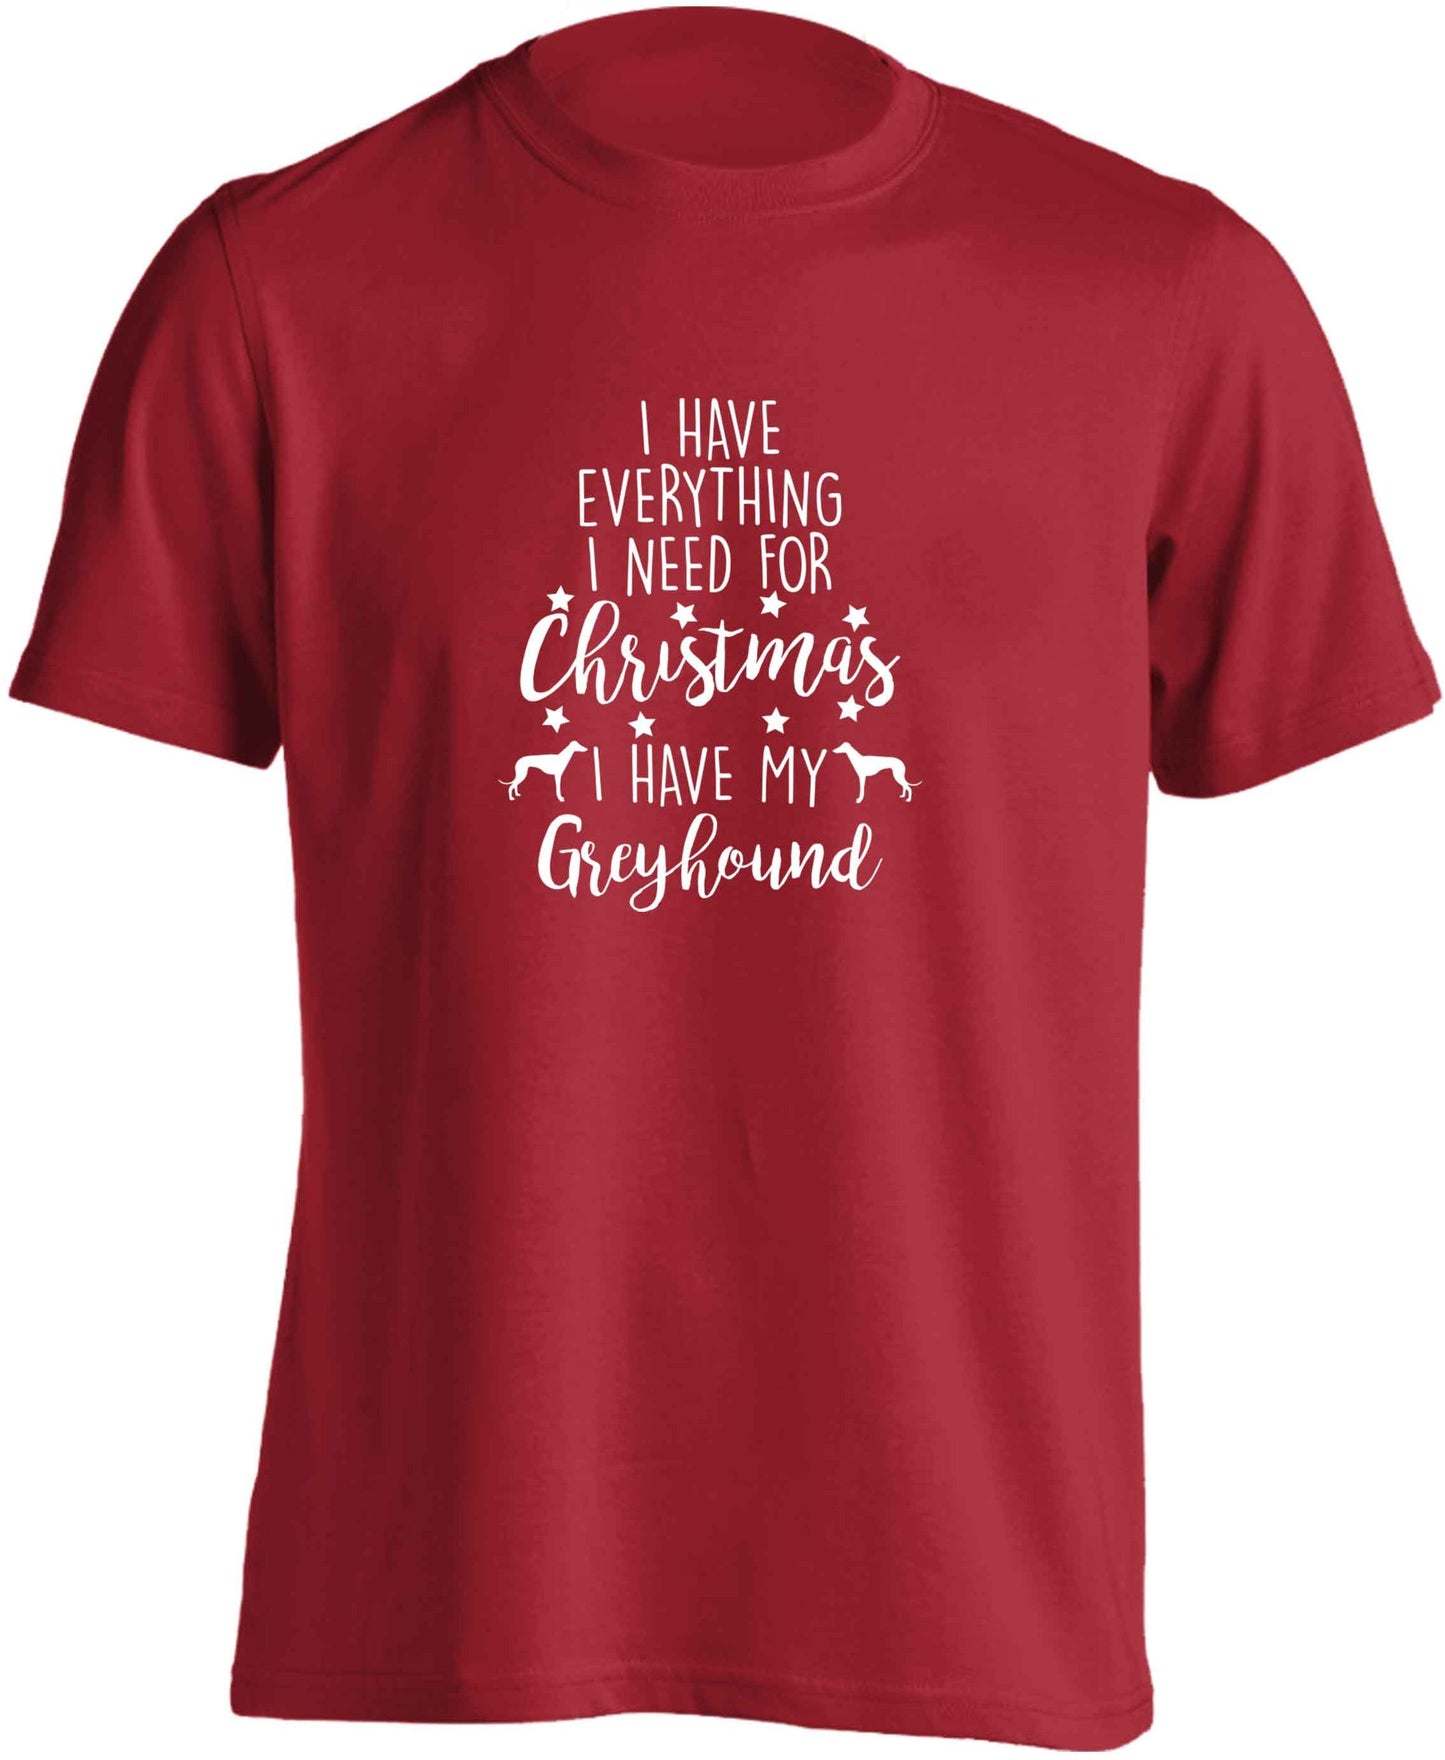 I have everything I need for Christmas I have my greyhound adults unisex red Tshirt 2XL